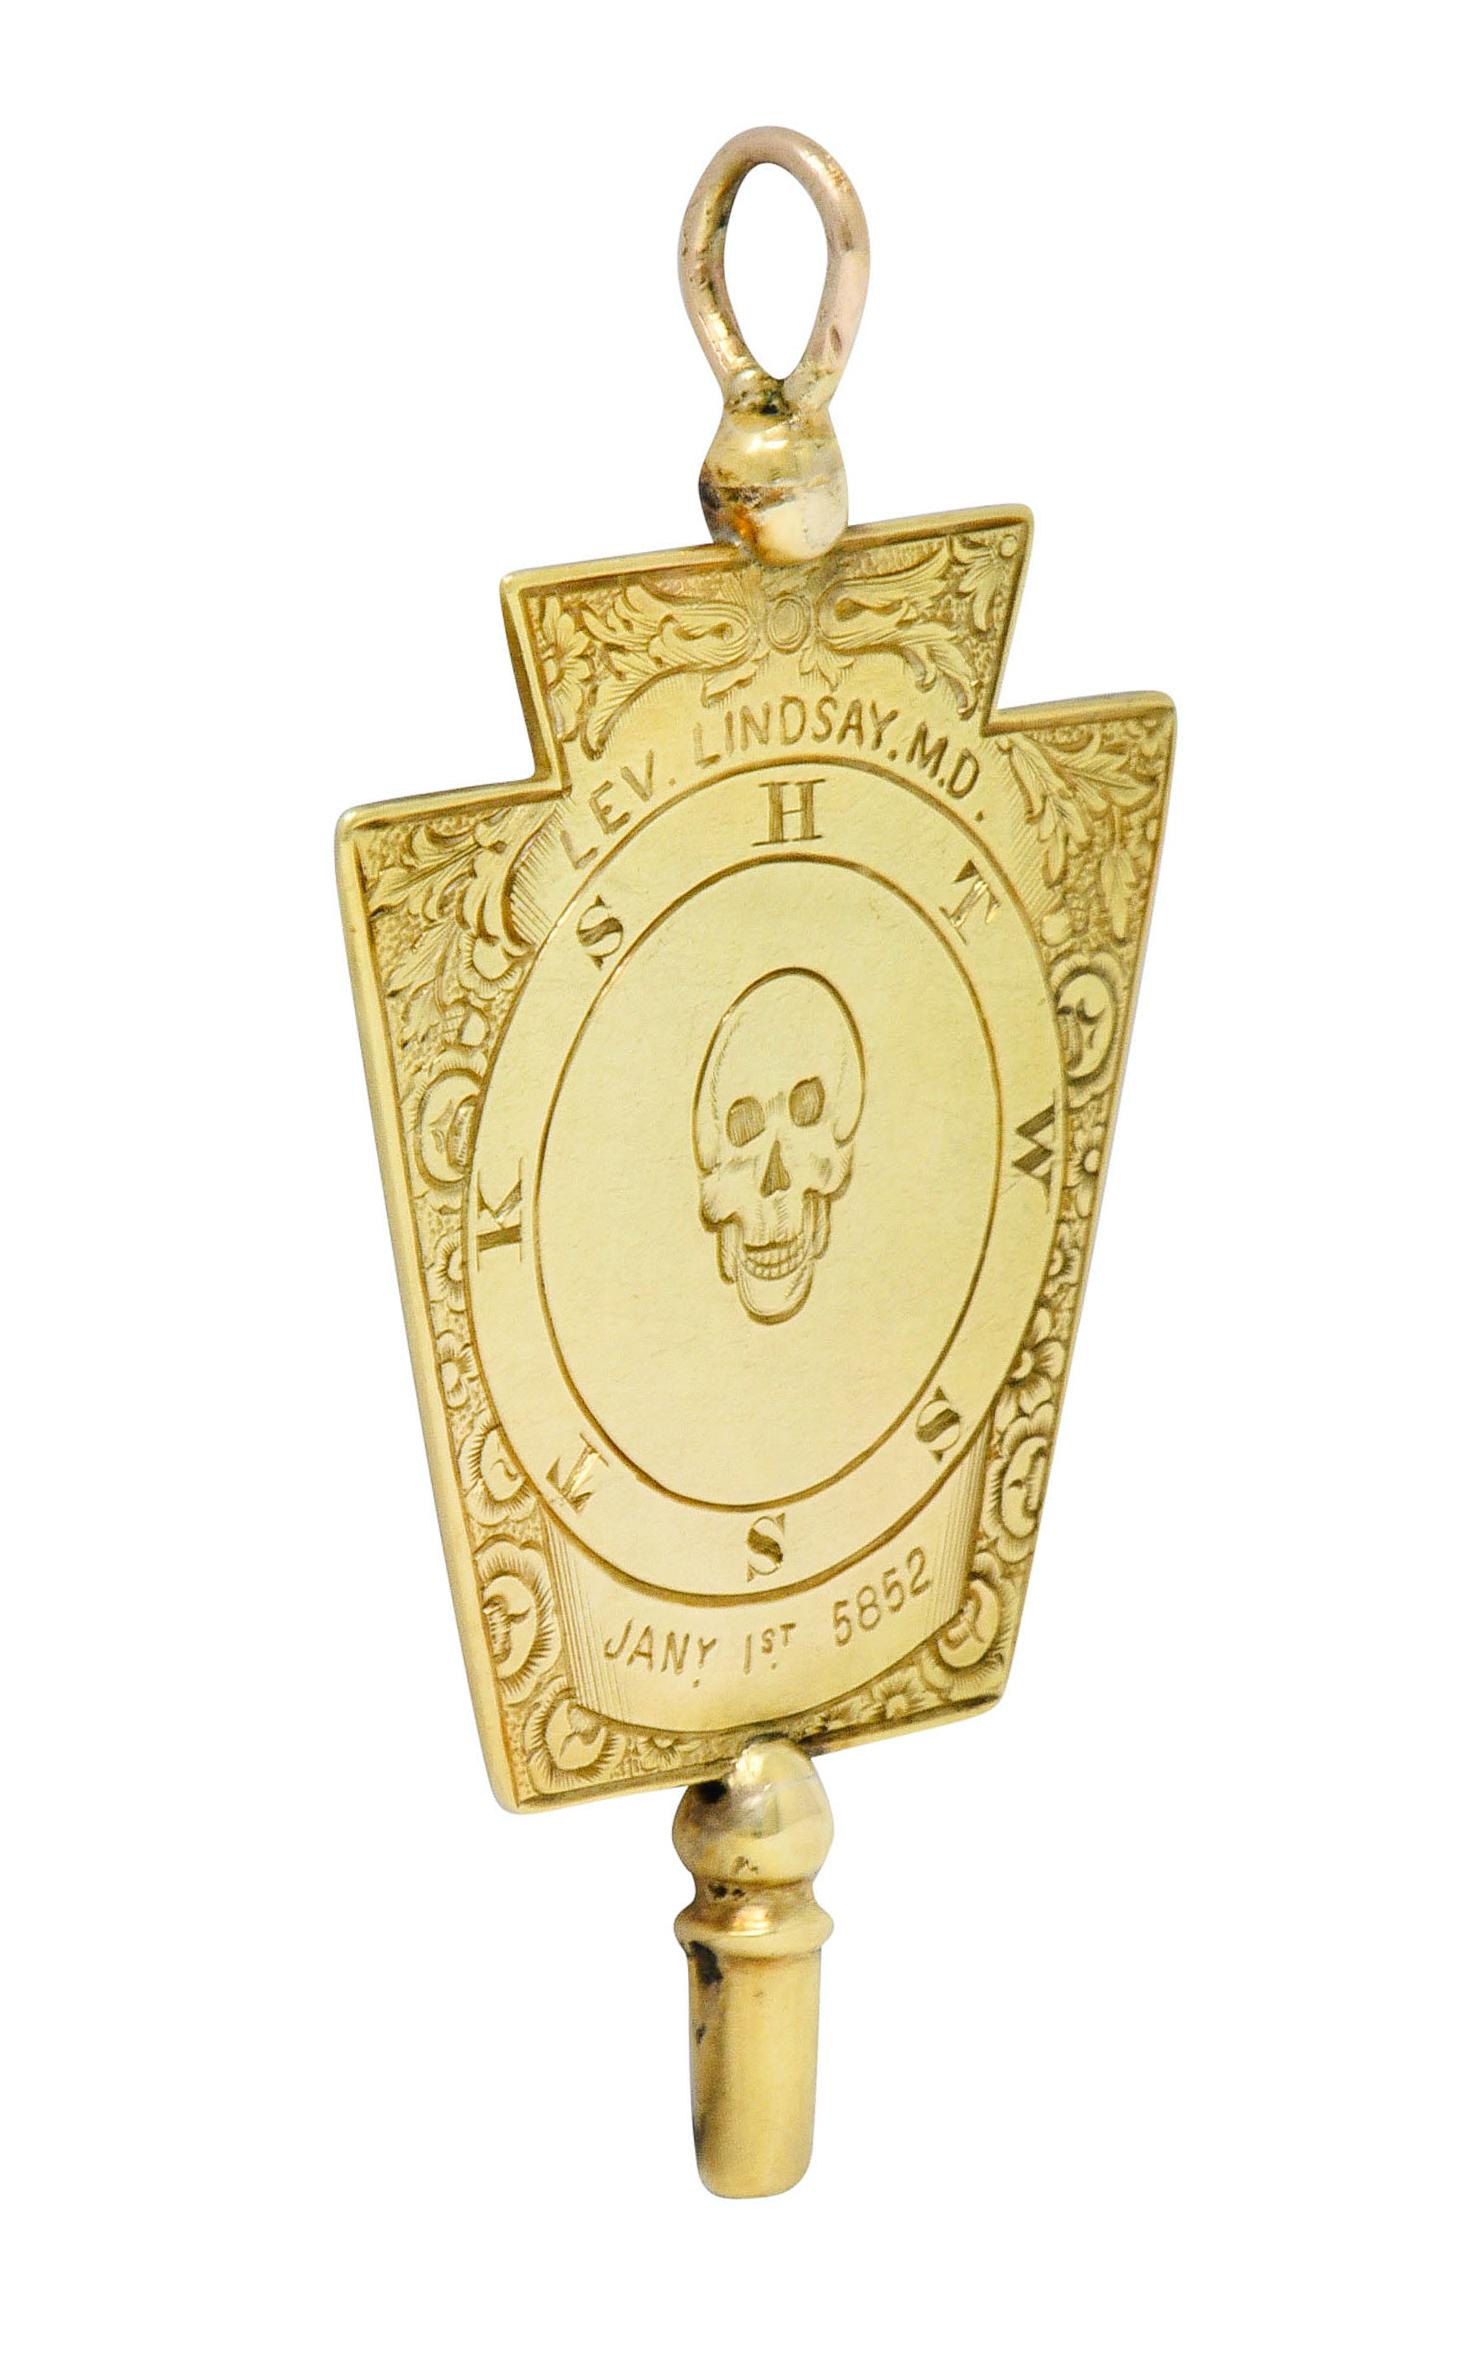 Pendant is a Freemason watch key shaped as a keystone for a Mark Master Lodge ranking

Deeply engraved with a skull, arch, eye, and other Freemasonic motifs

With an ornate floral engraved border

Tested as 14 karat gold

Circa: 1860s

Measures: 1